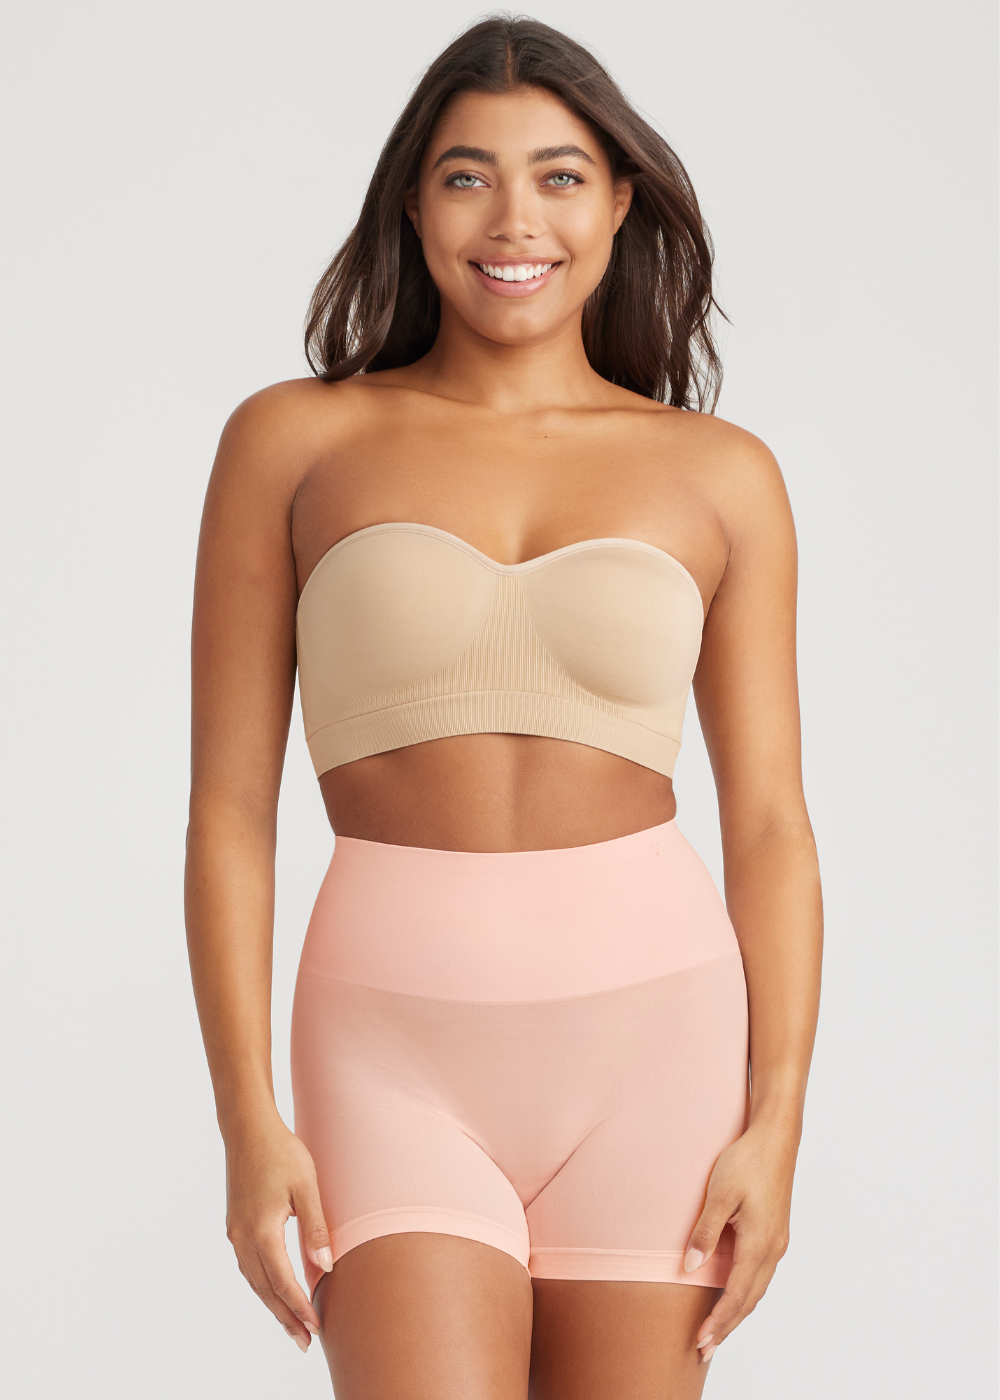 ultralight shaping short - seamless in English Rose and bandeau bra - seamless in Almond worn by girl with hands at sides and facing forward. Yummie.